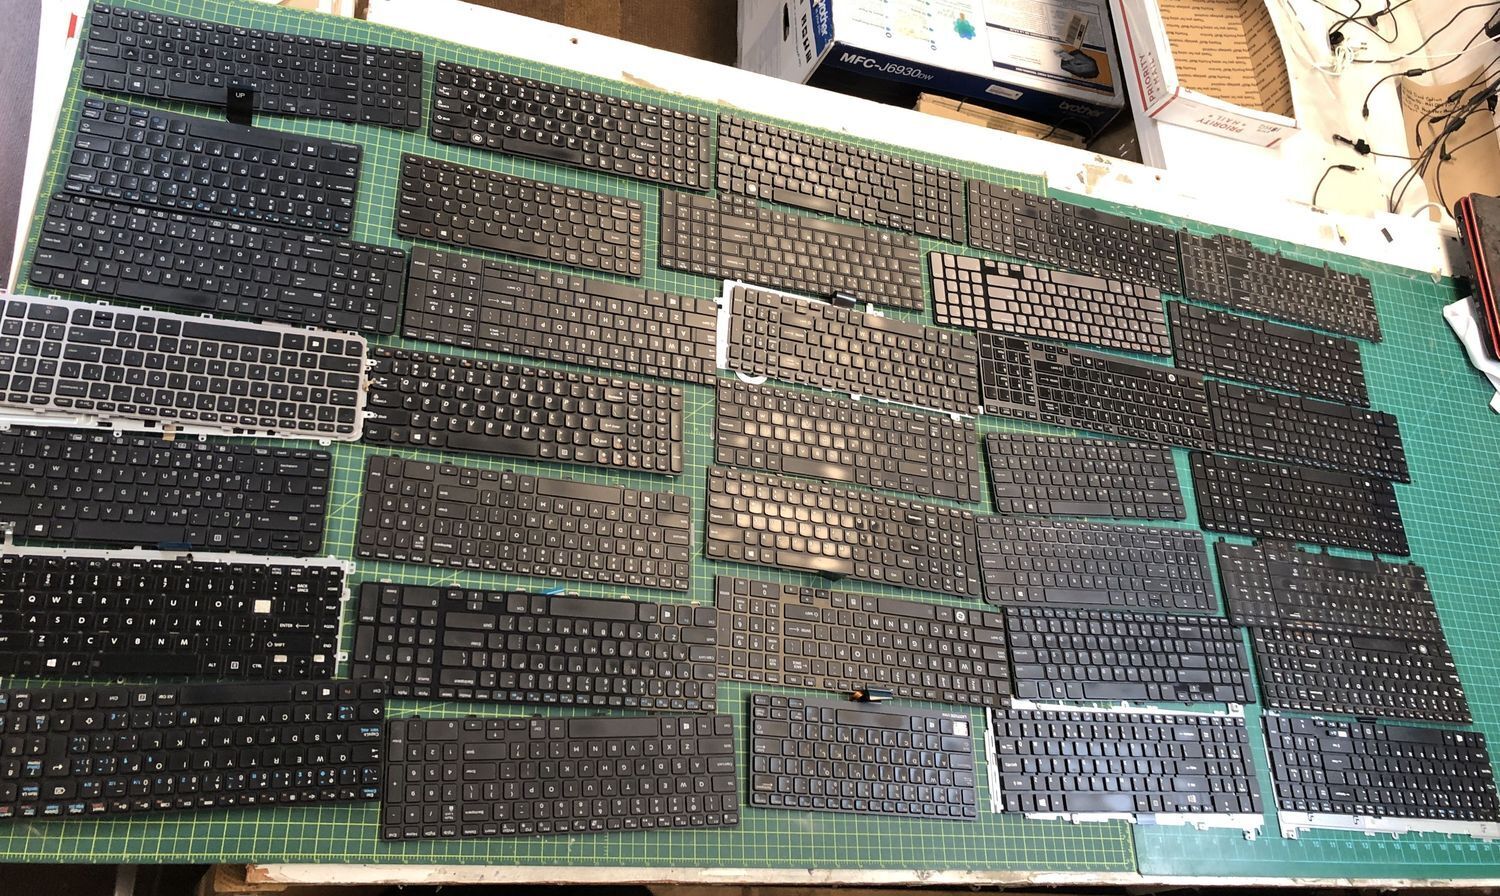 Lot of 35 Mix Various Brand Laptop Keyboards for Lenovo Dell HP Toshiba etc #12	